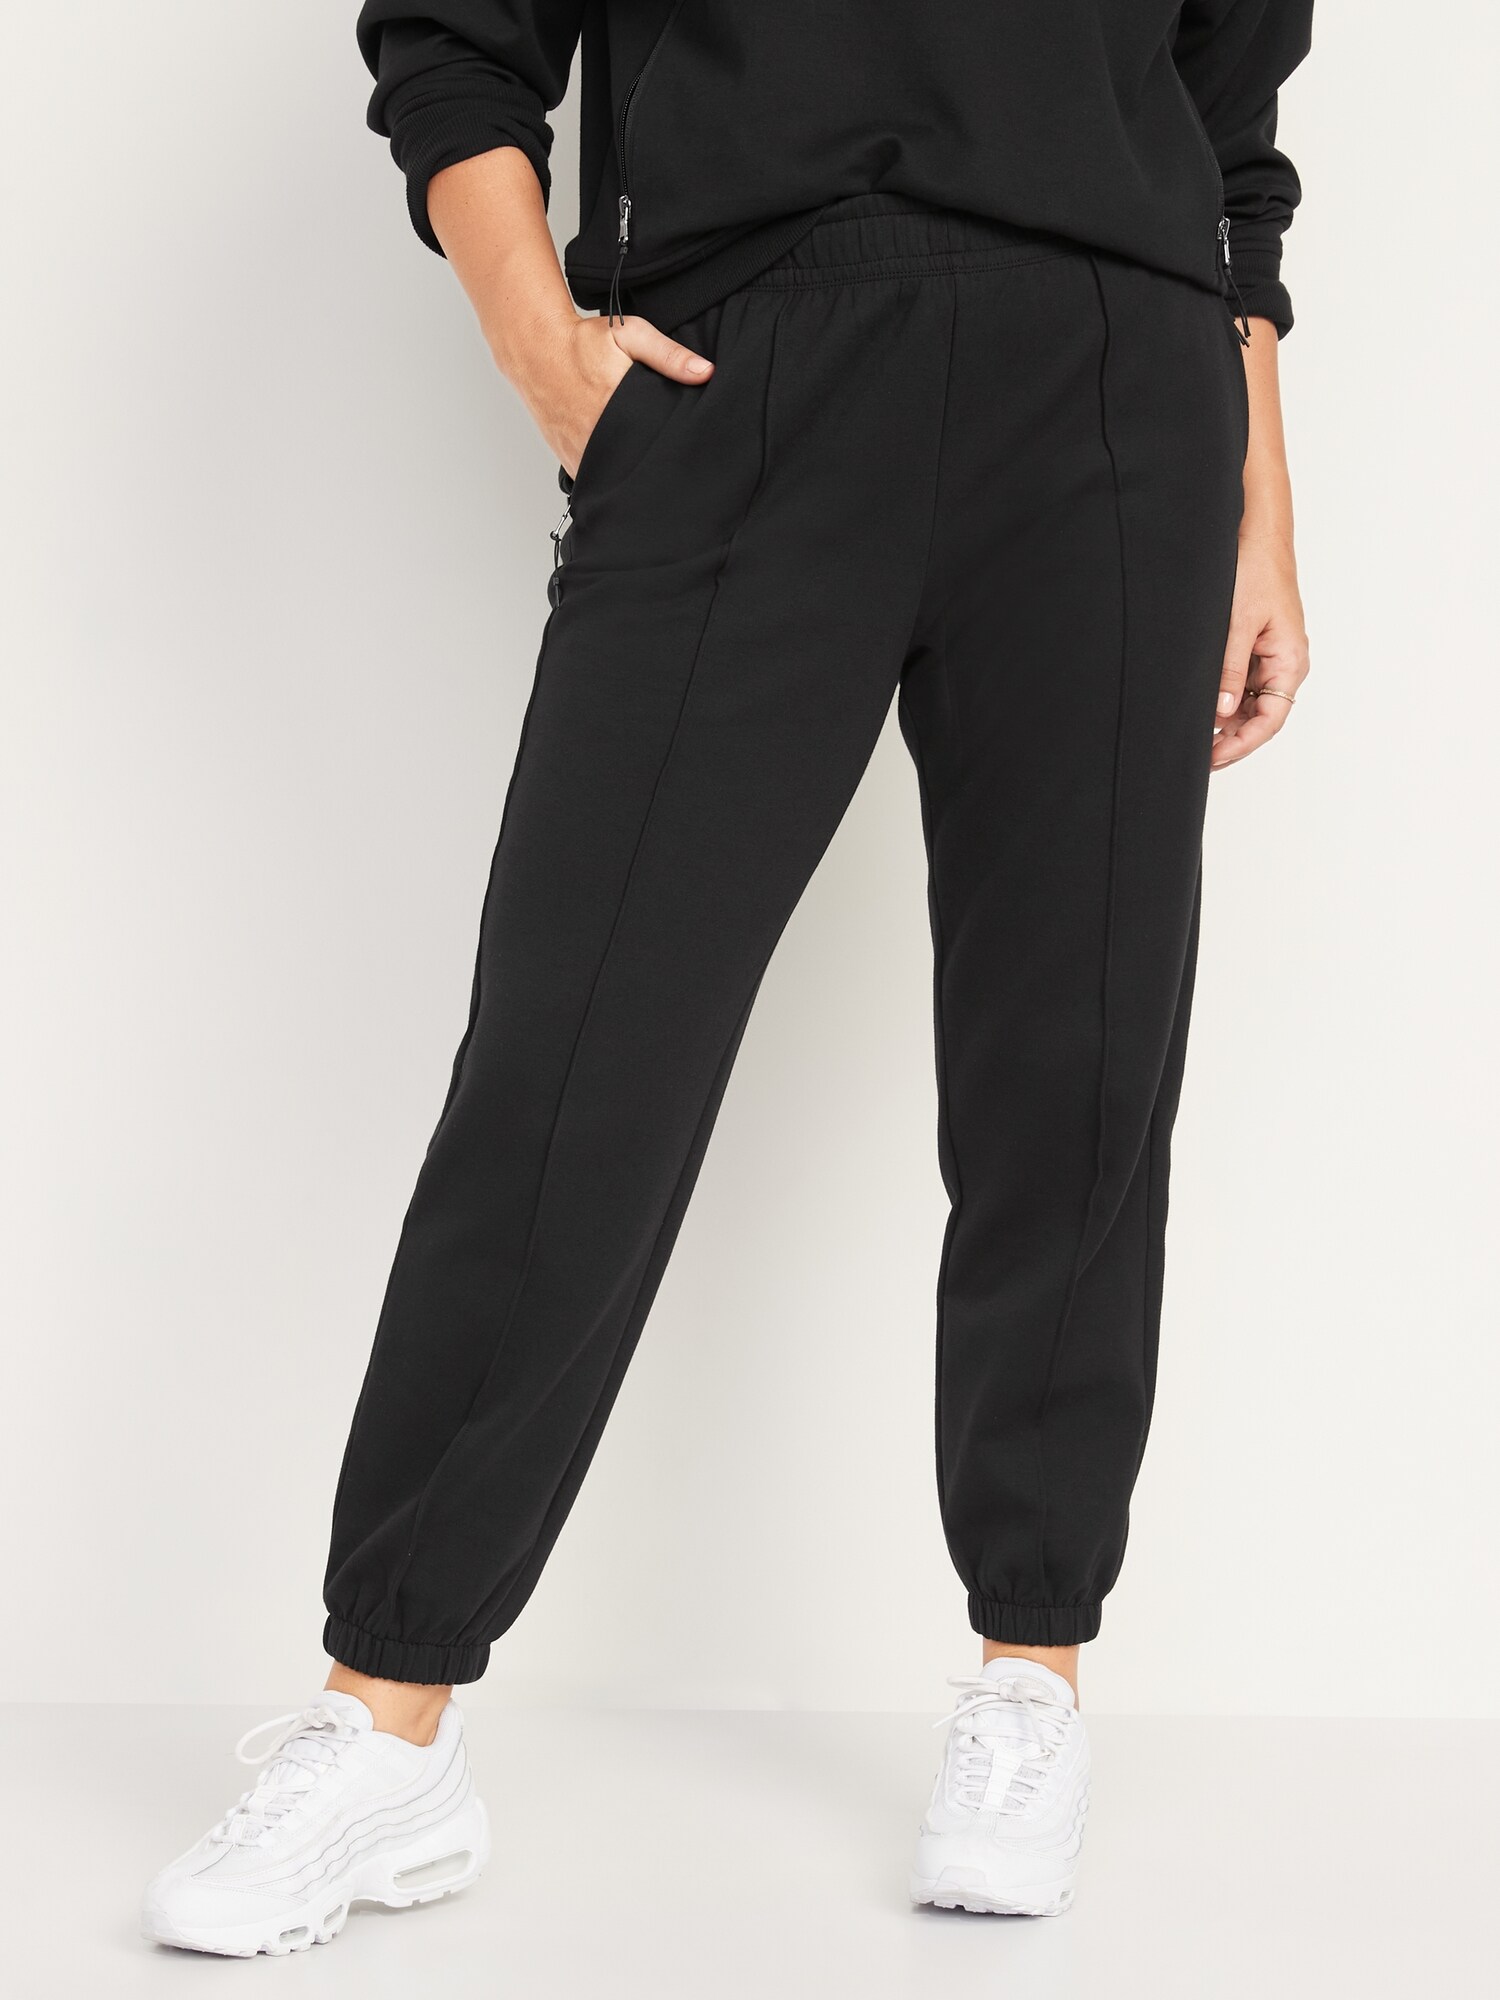 High-Waisted Dynamic Fleece Pintucked Sweatpants for Women | Old Navy